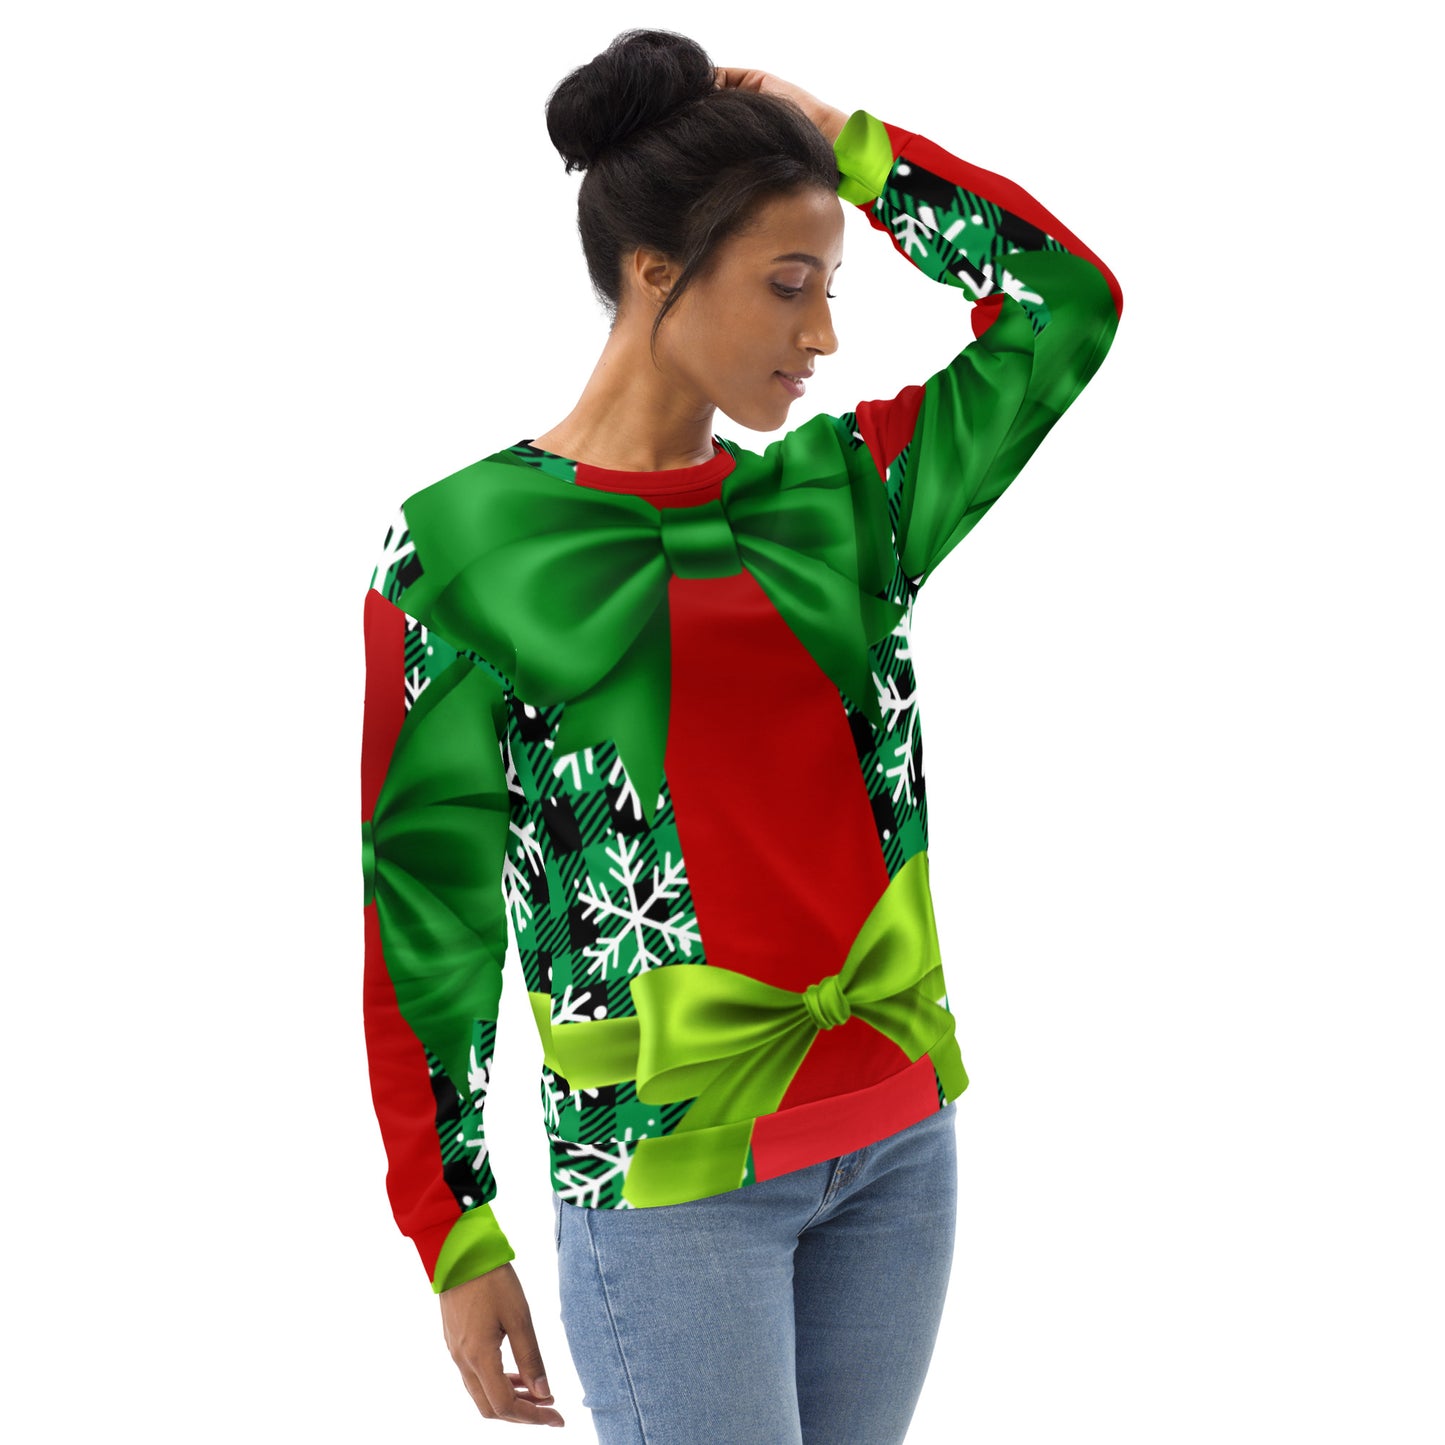 "Wrapped with a Bow" Holiday Ugly Sweater (Christmas)